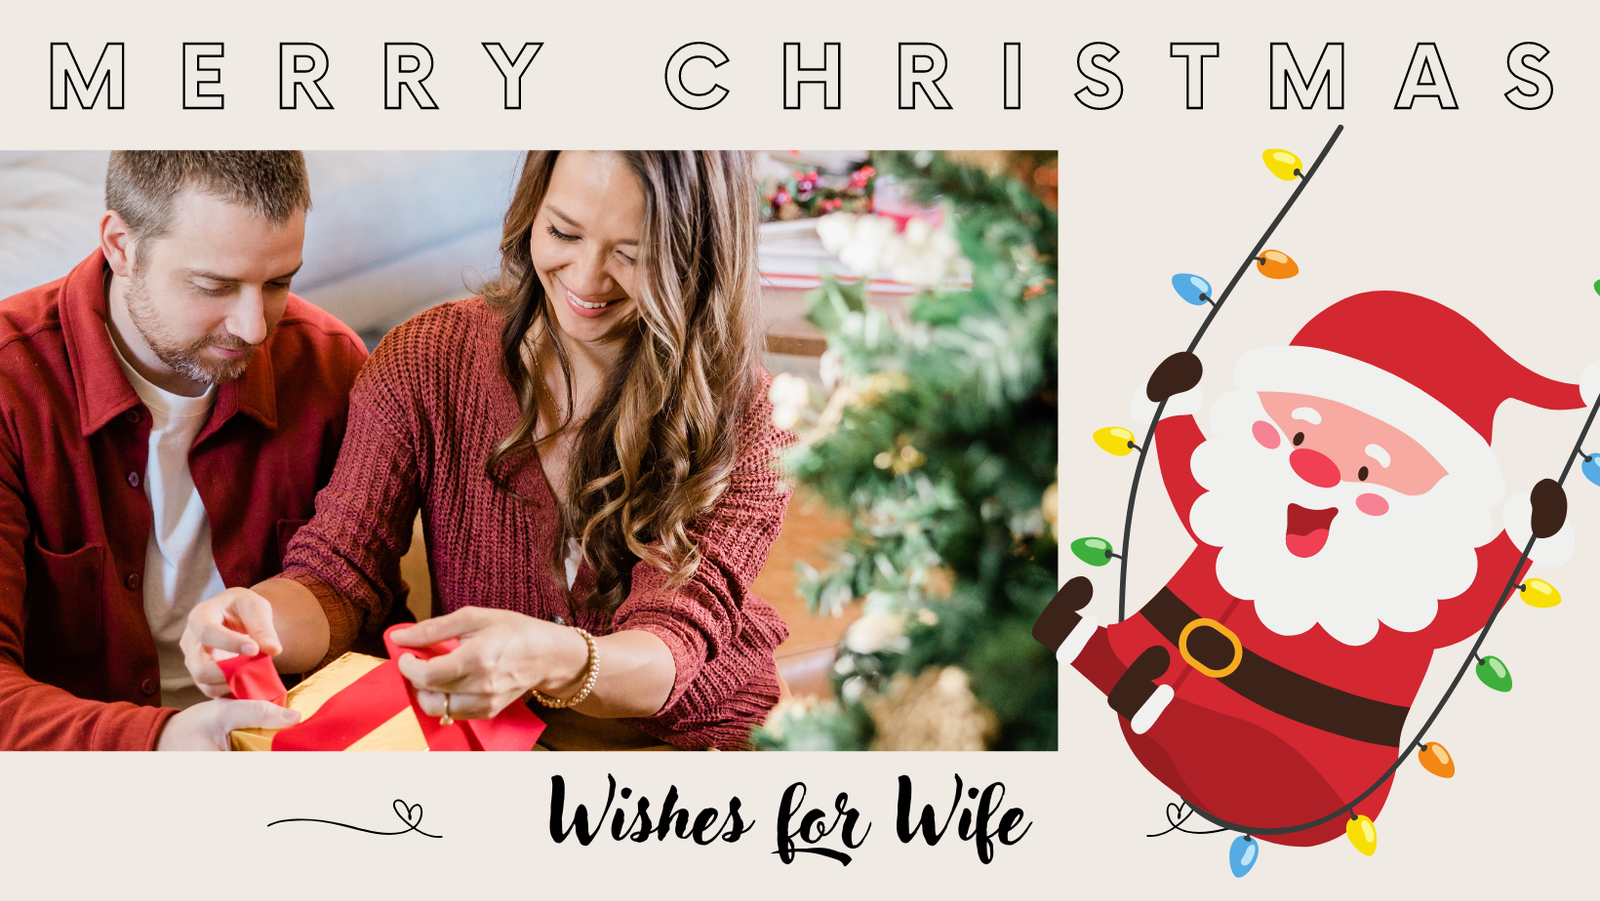 15 Heartfelt Messages: Merry Christmas Wishes for Wife